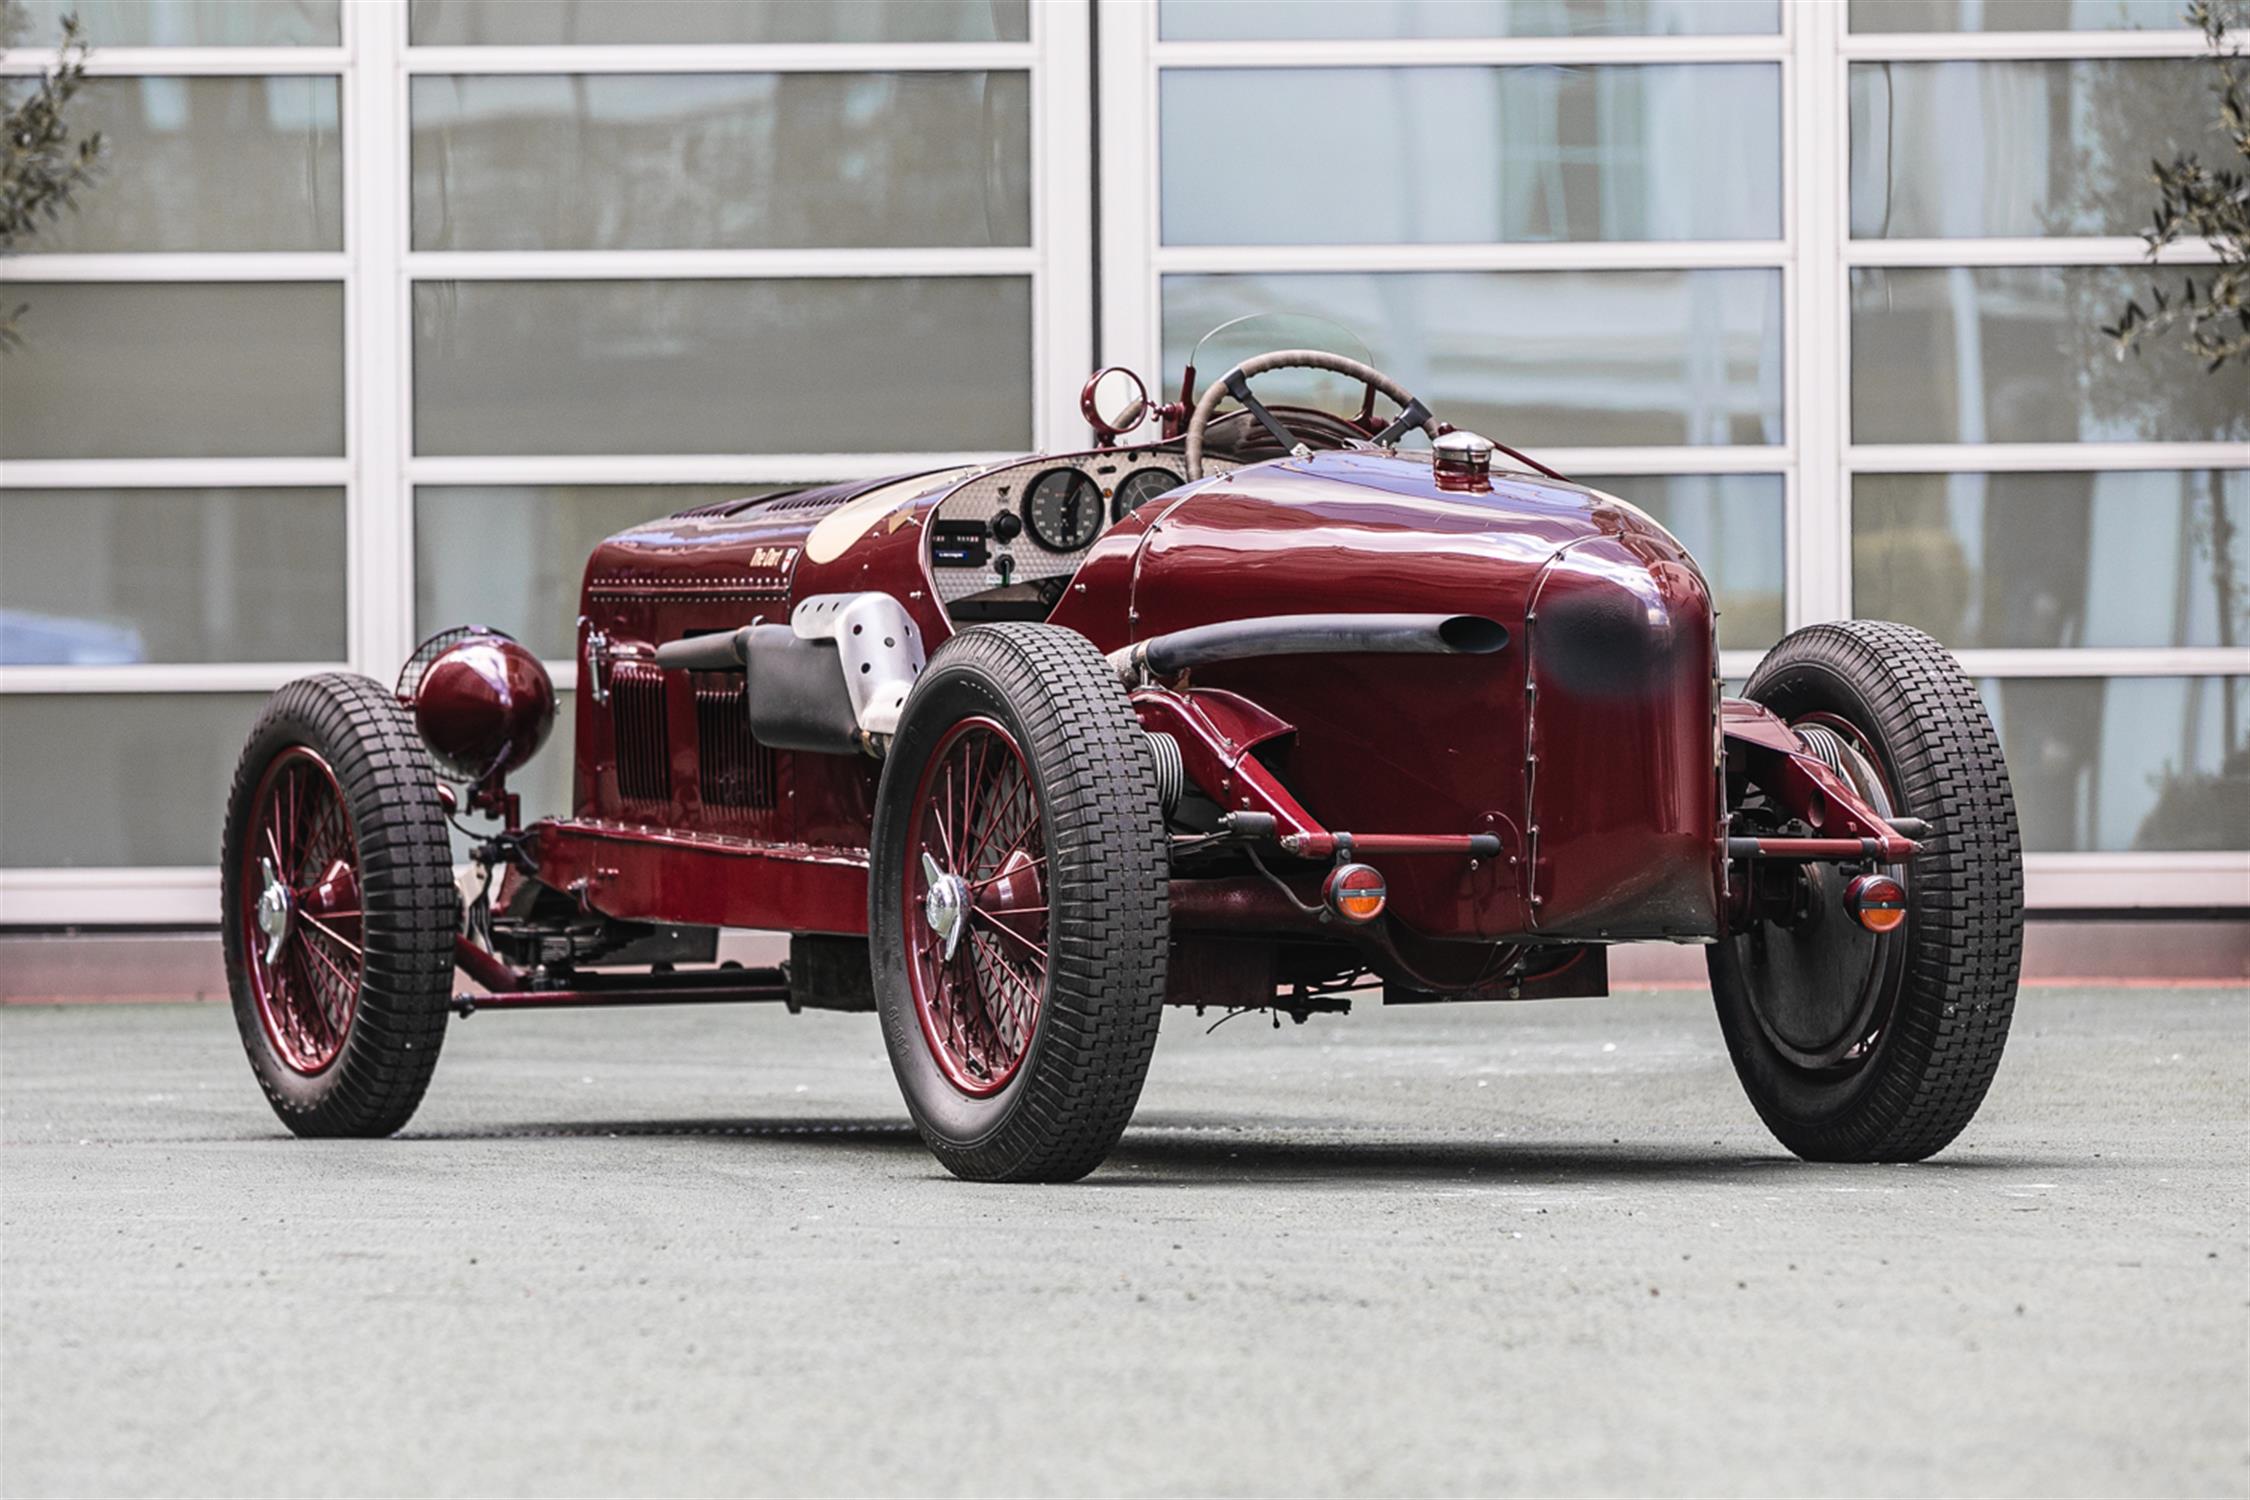 1937 Riley Monza Special 2.5 Litre (FIVA) - The Dart - Image 3 of 10